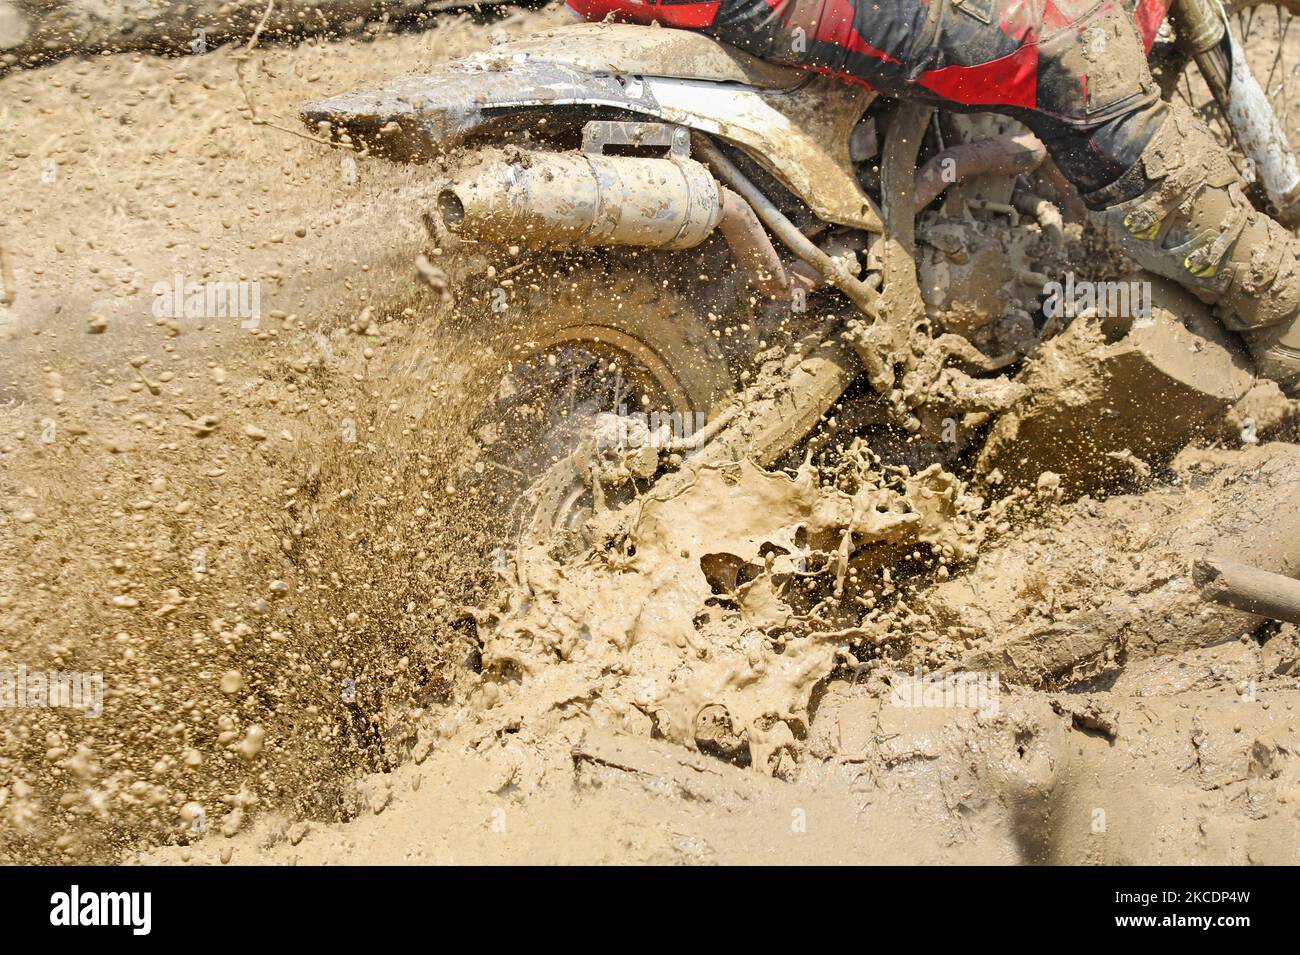 Motocross accelerating speed in mud Stock Photo